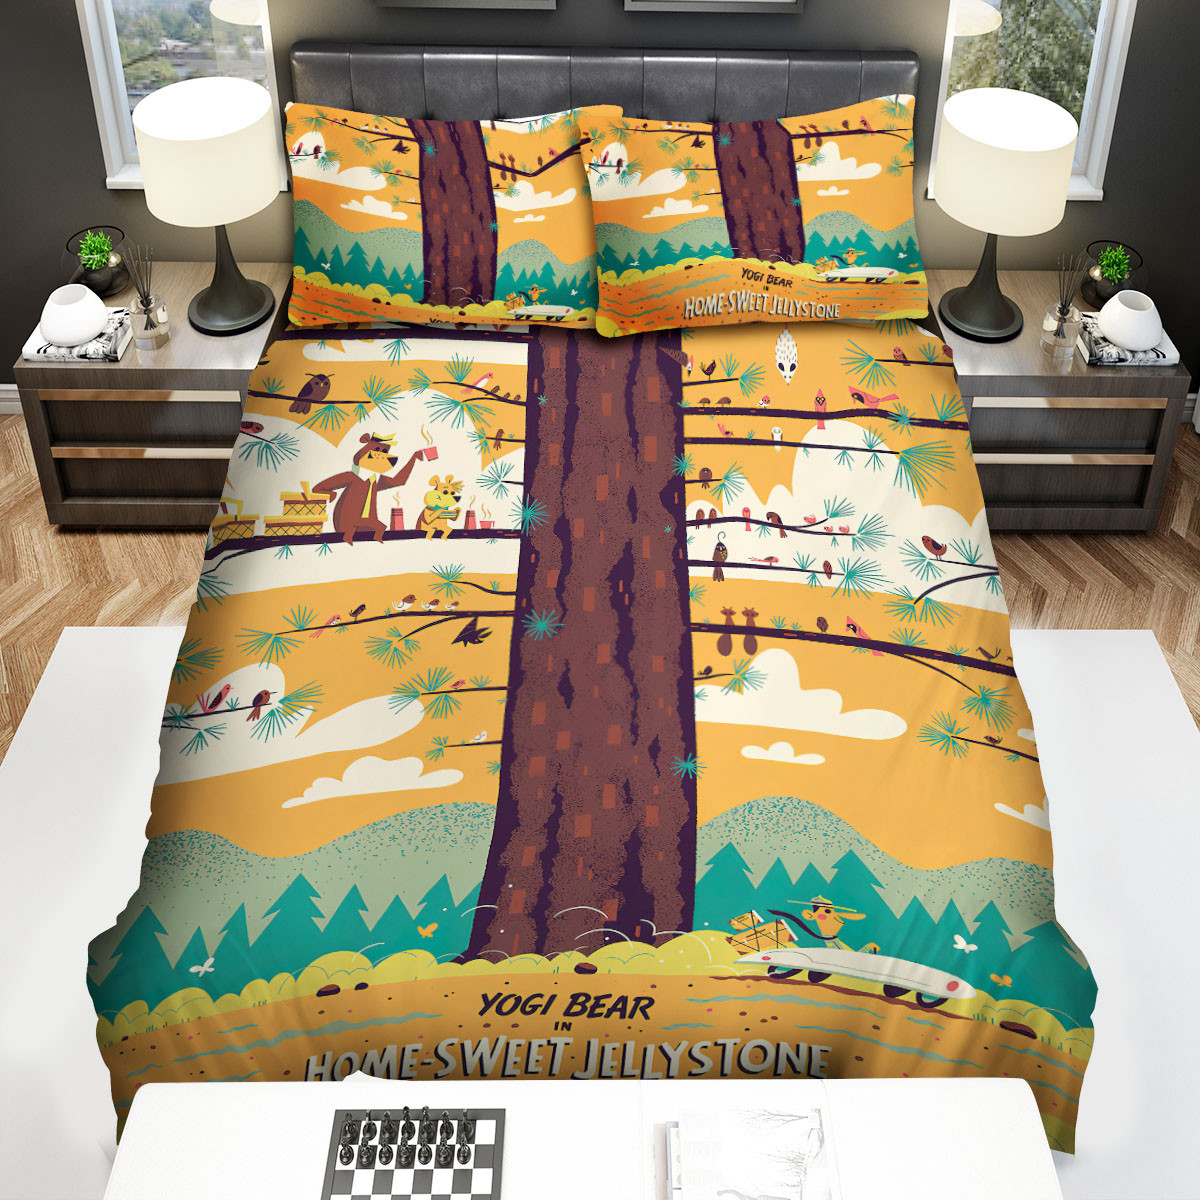 Yogi Bear In Home-Sweet Jellystone Poster Bed Sheets Spread Duvet Cover Bedding Sets